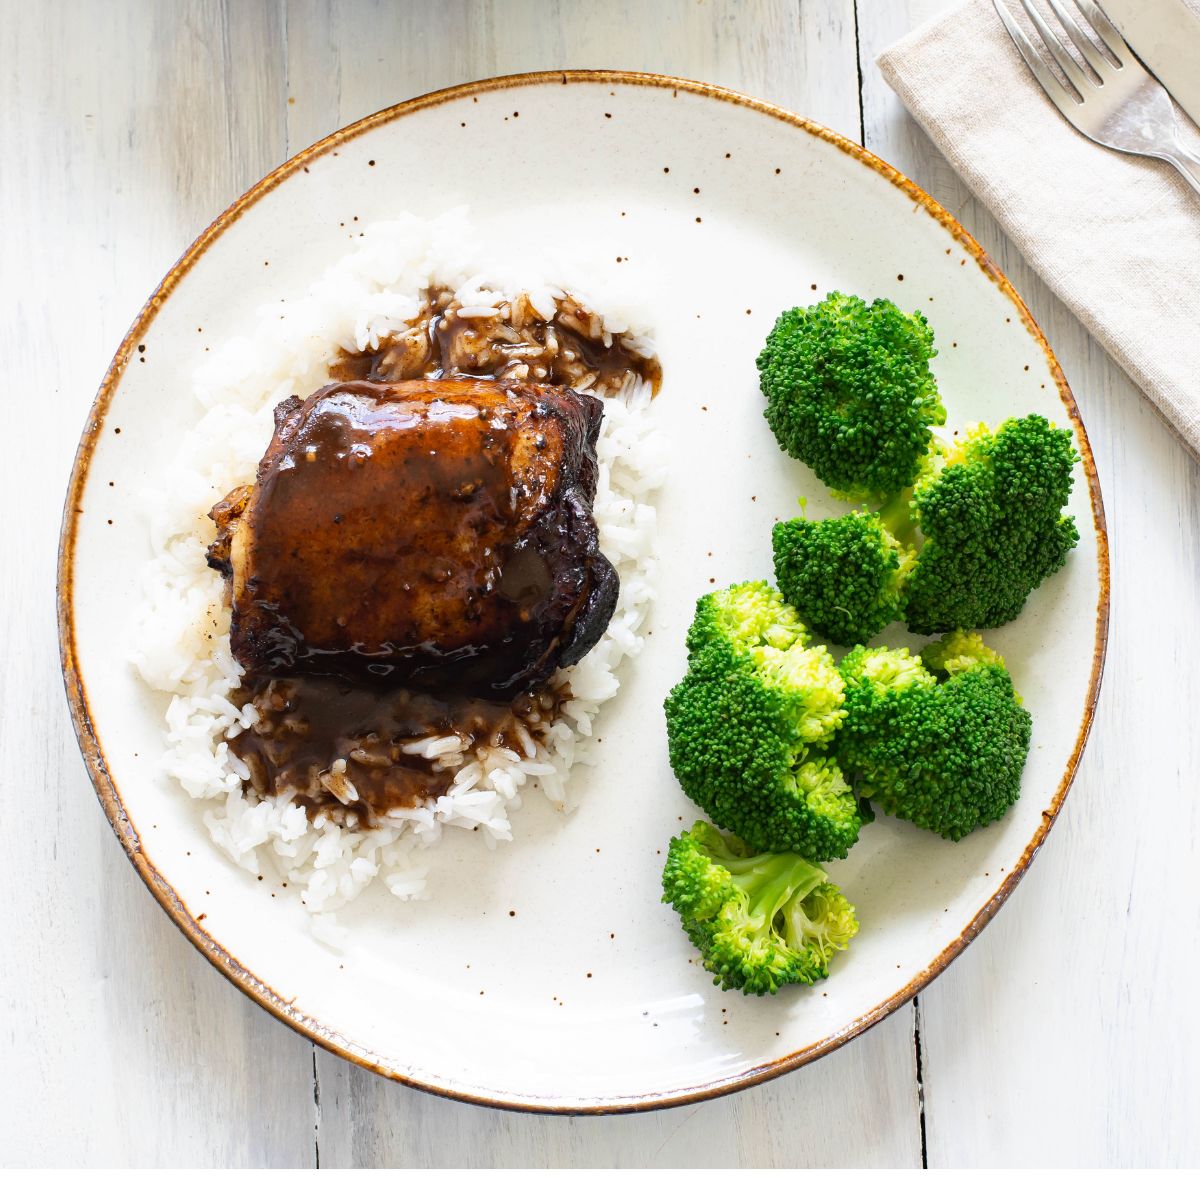 Balsamic chicken thigh served over rice with broccoli on the side.